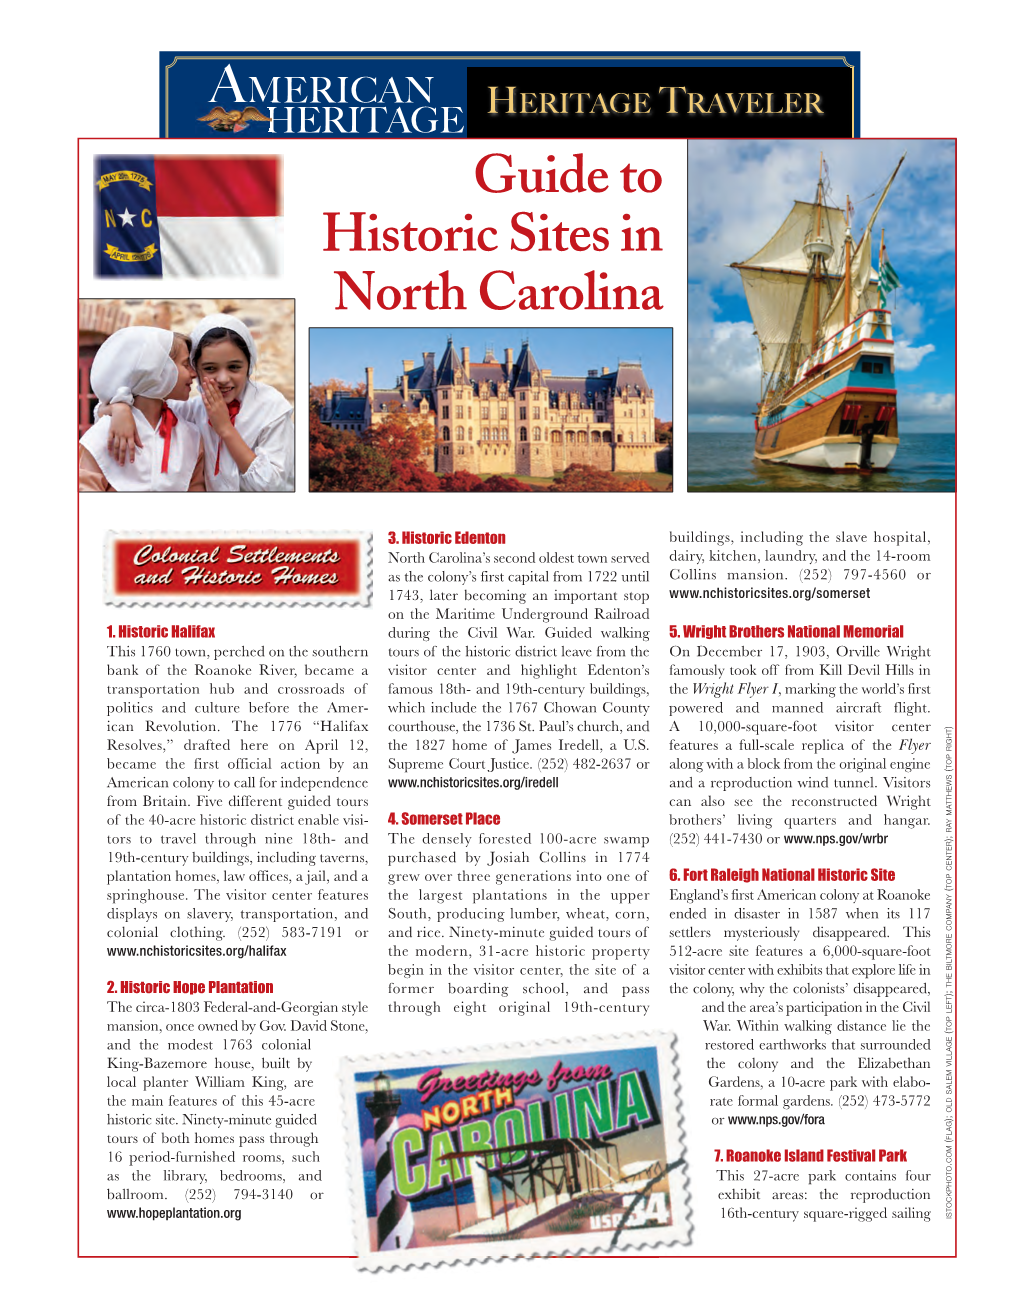 Guide to Historic Sites in North Carolina